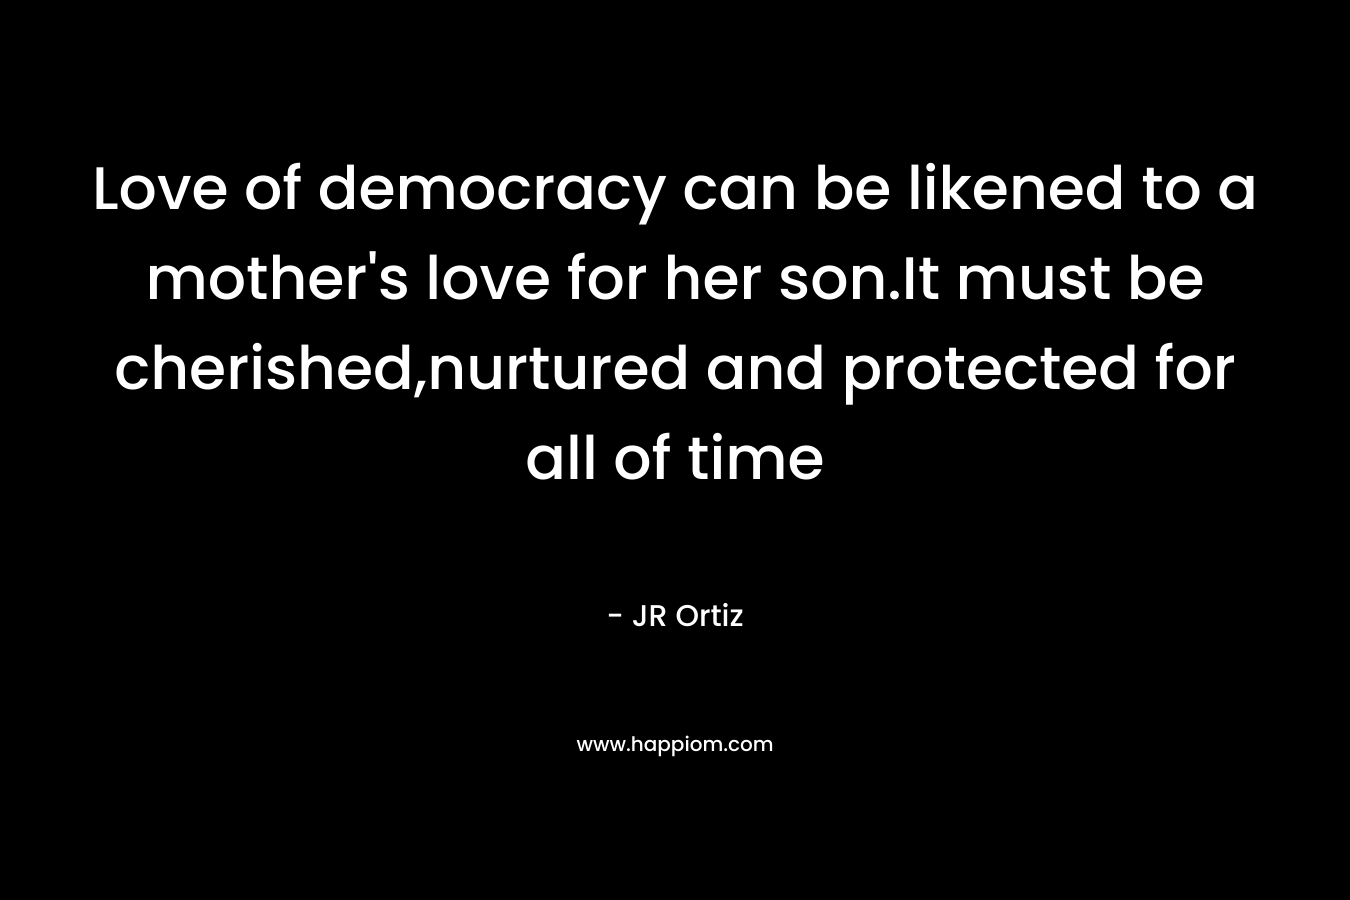 Love of democracy can be likened to a mother's love for her son.It must be cherished,nurtured and protected for all of time